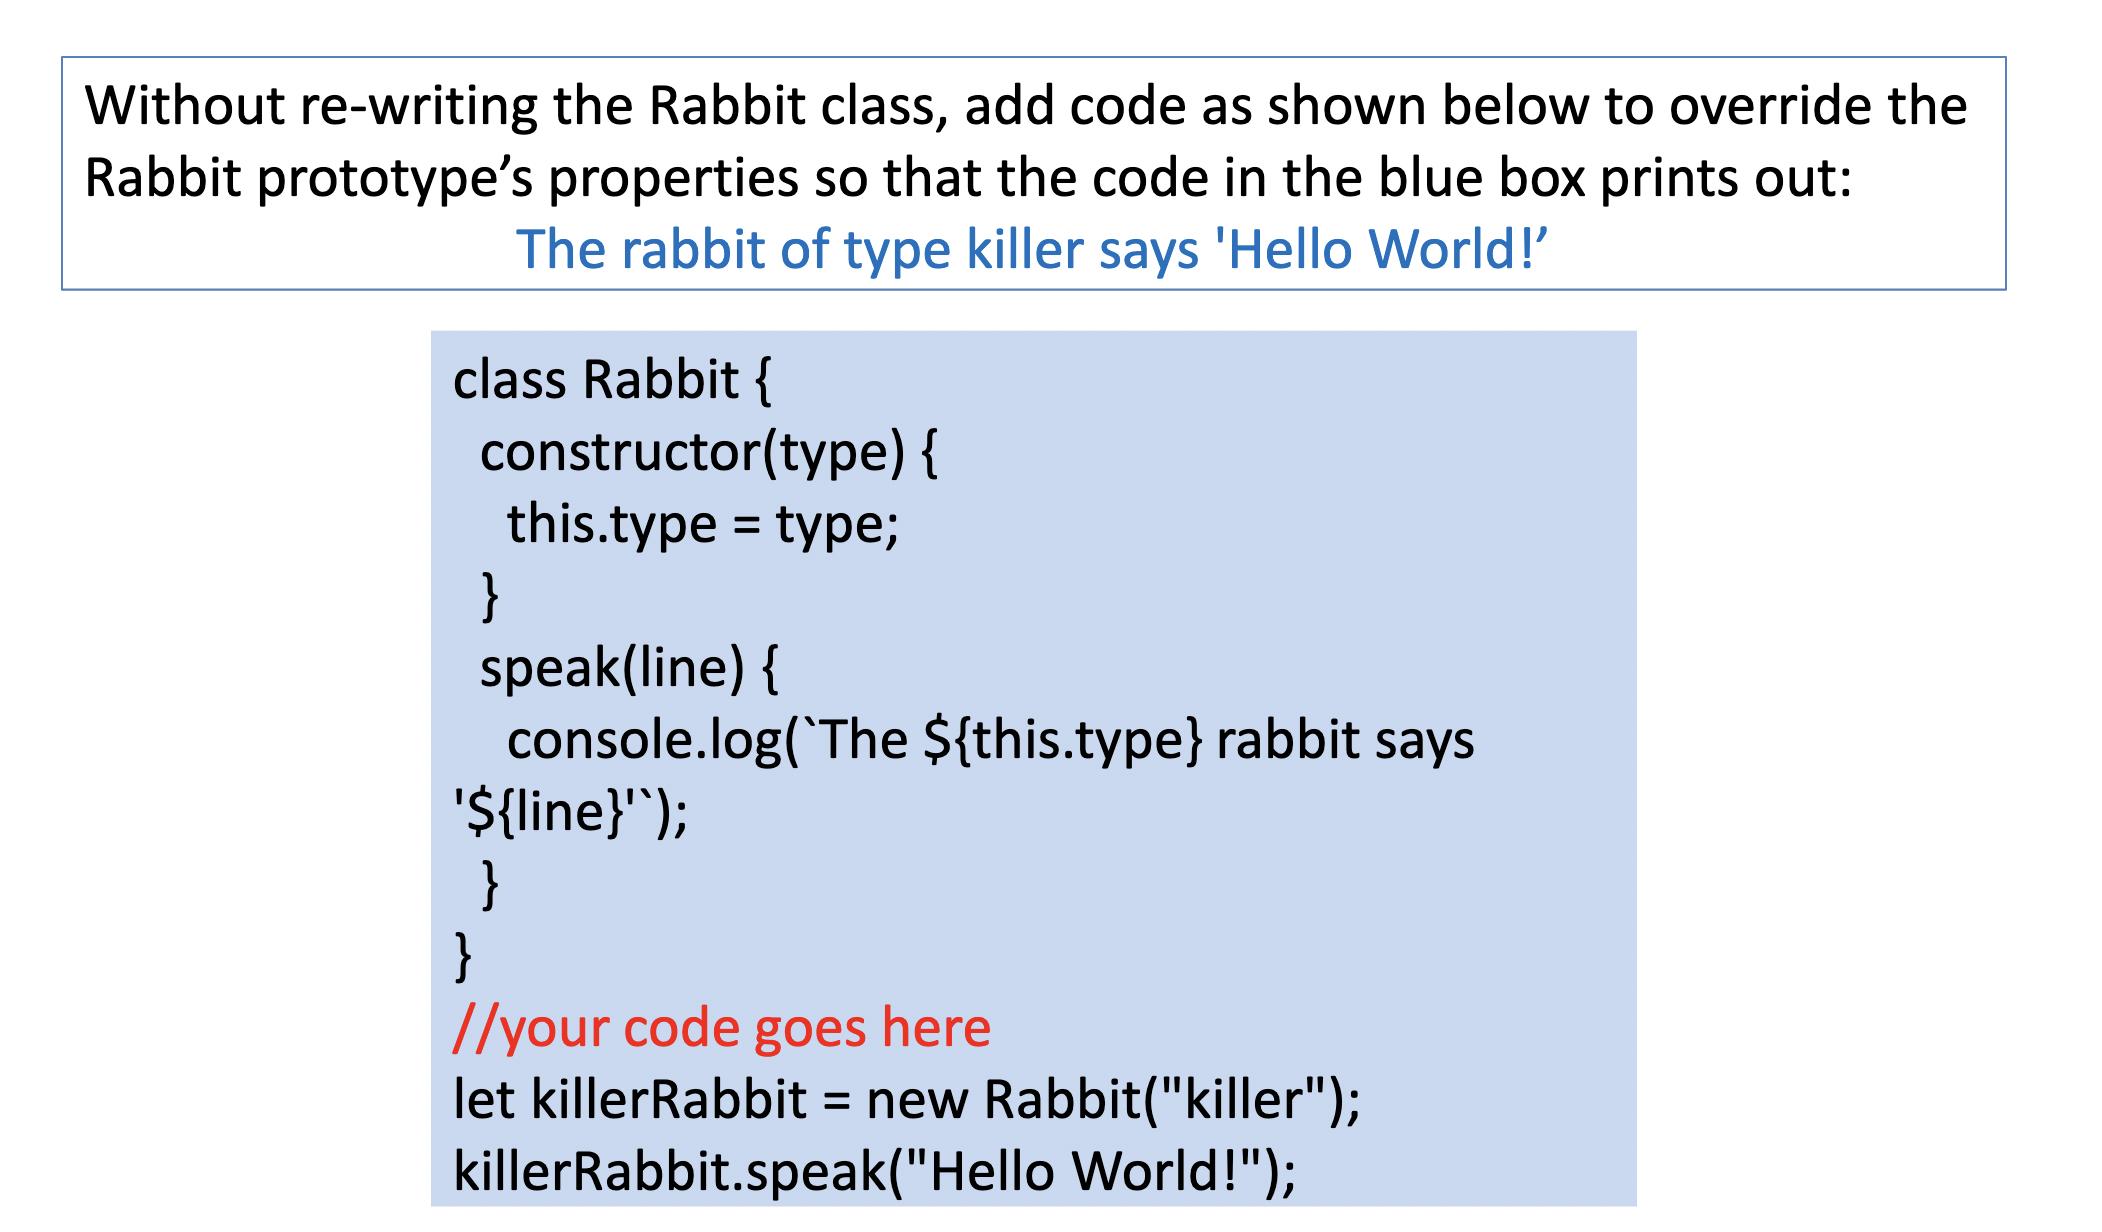 Without re-writing the Rabbit class, add code as shown below to override the Rabbit prototype's properties so